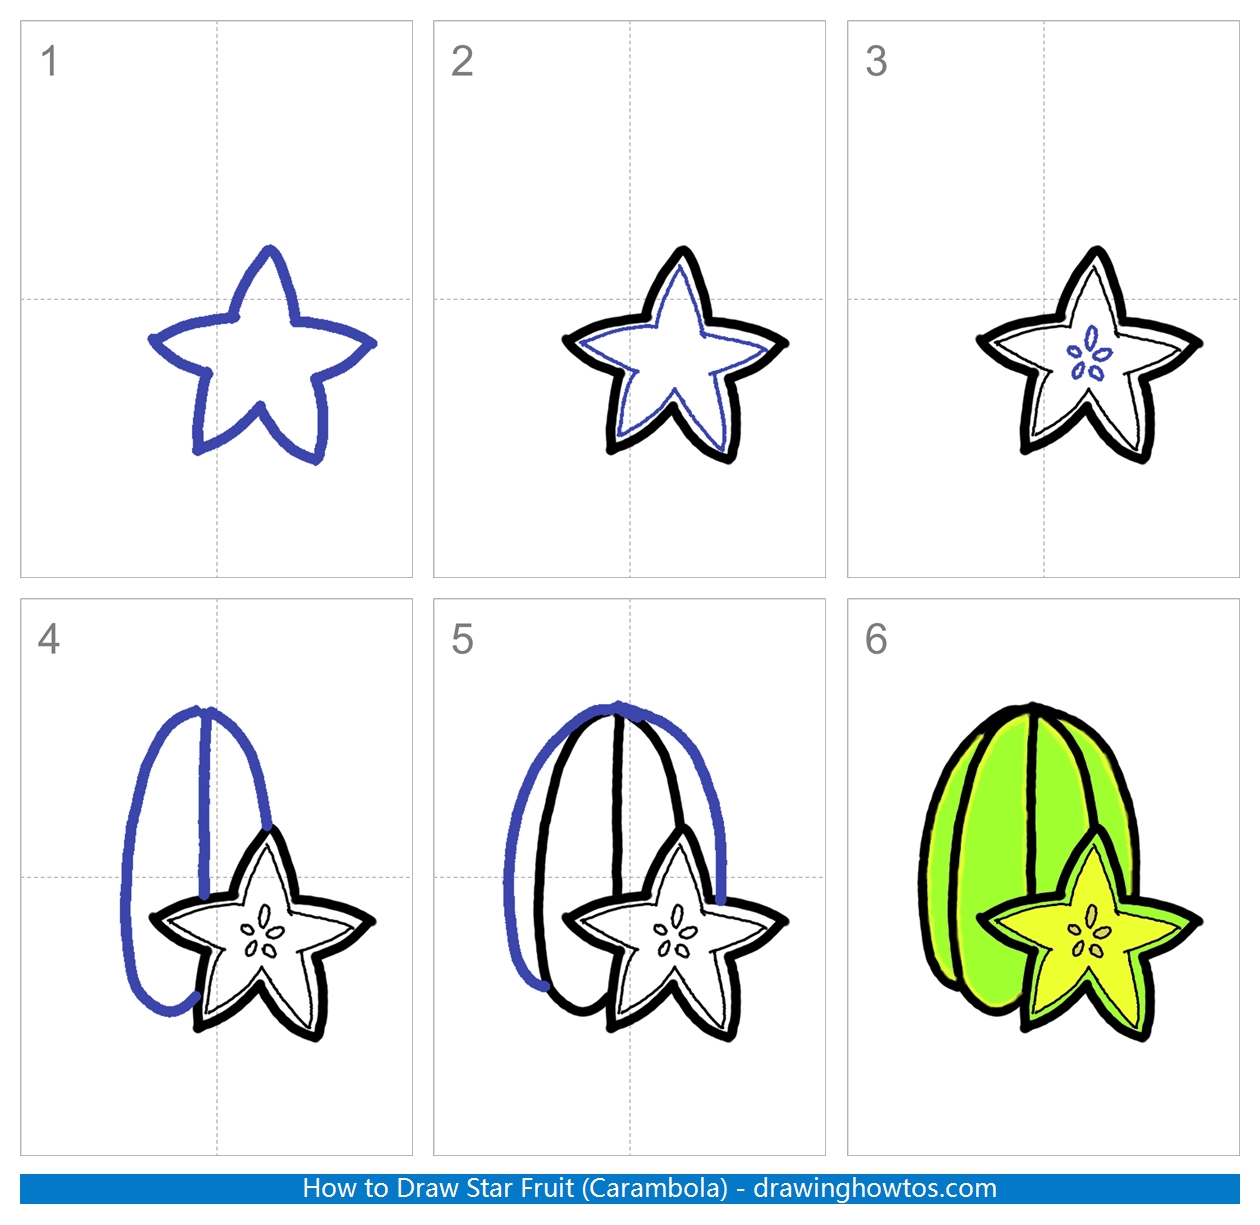 How to Draw a Star Fruit Step by Step